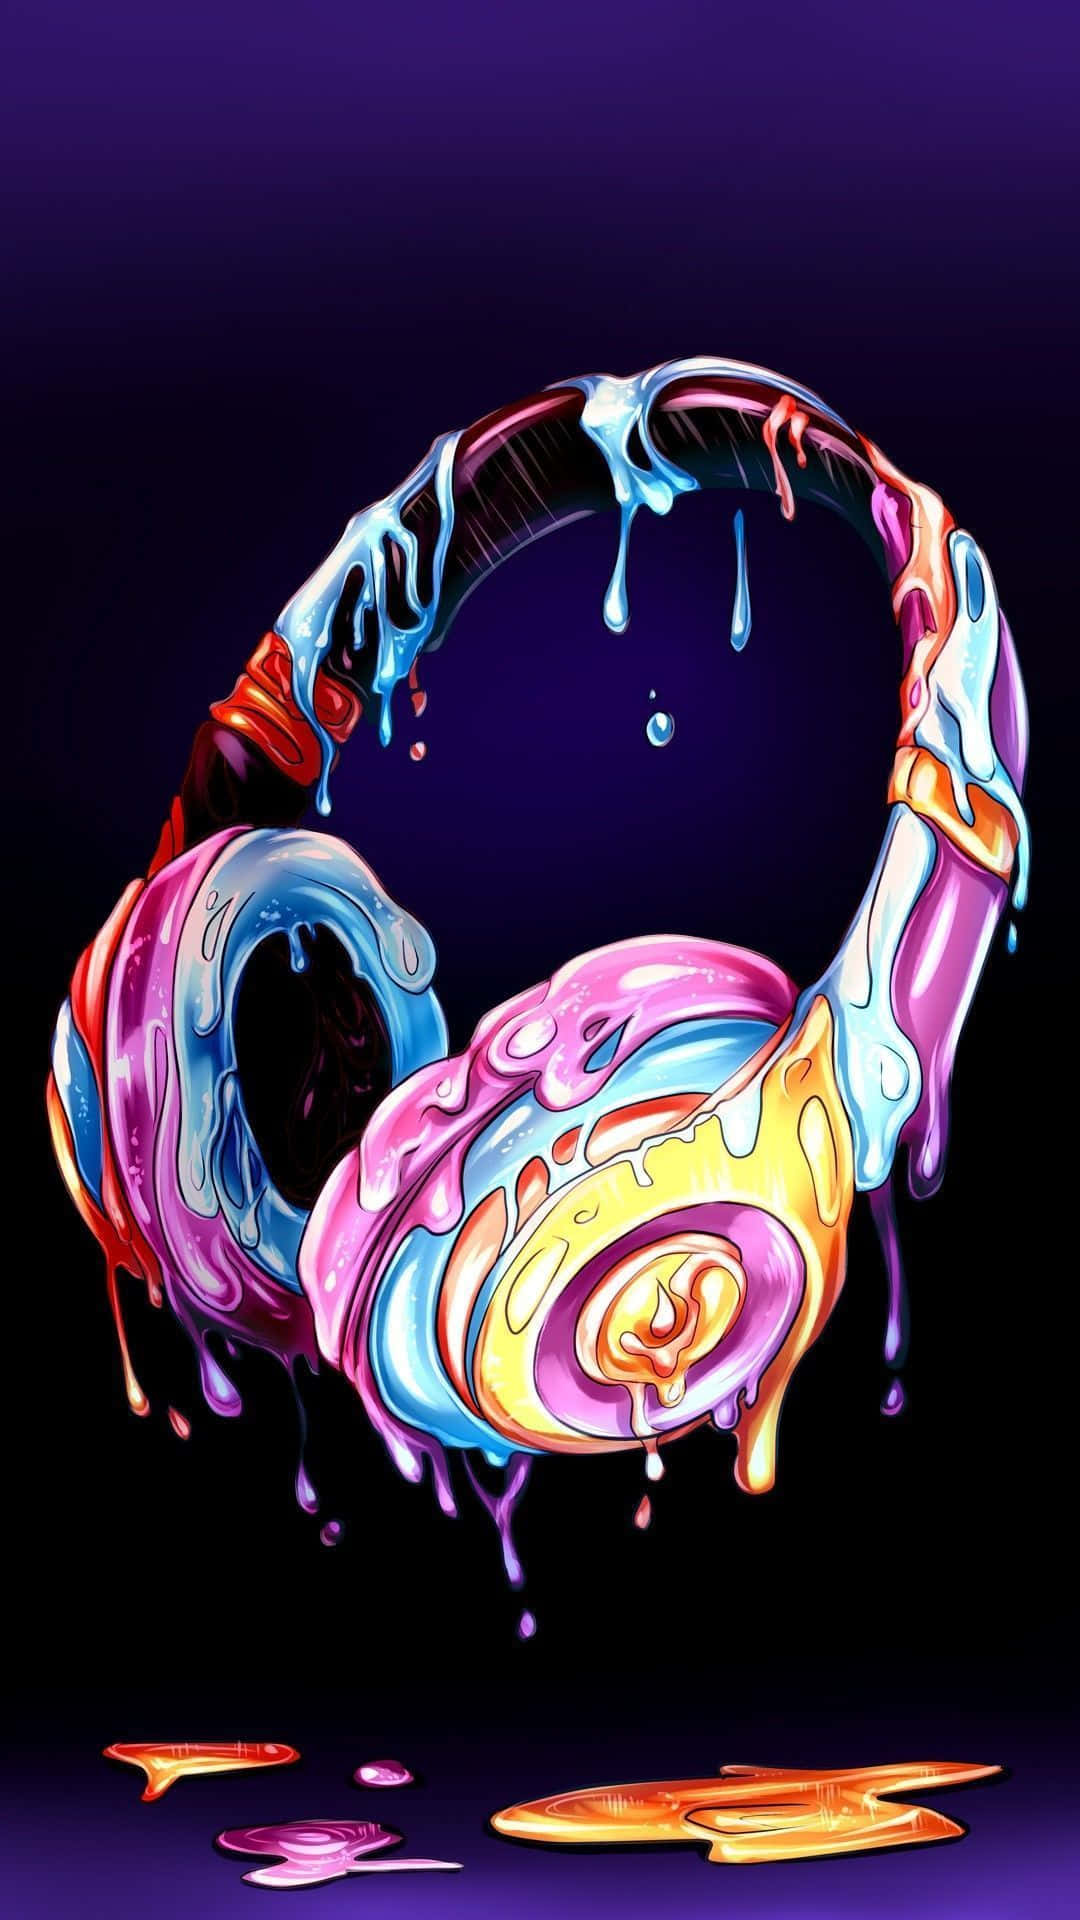 A Colorful Headphones With A Colorful Dripping Liquid Wallpaper